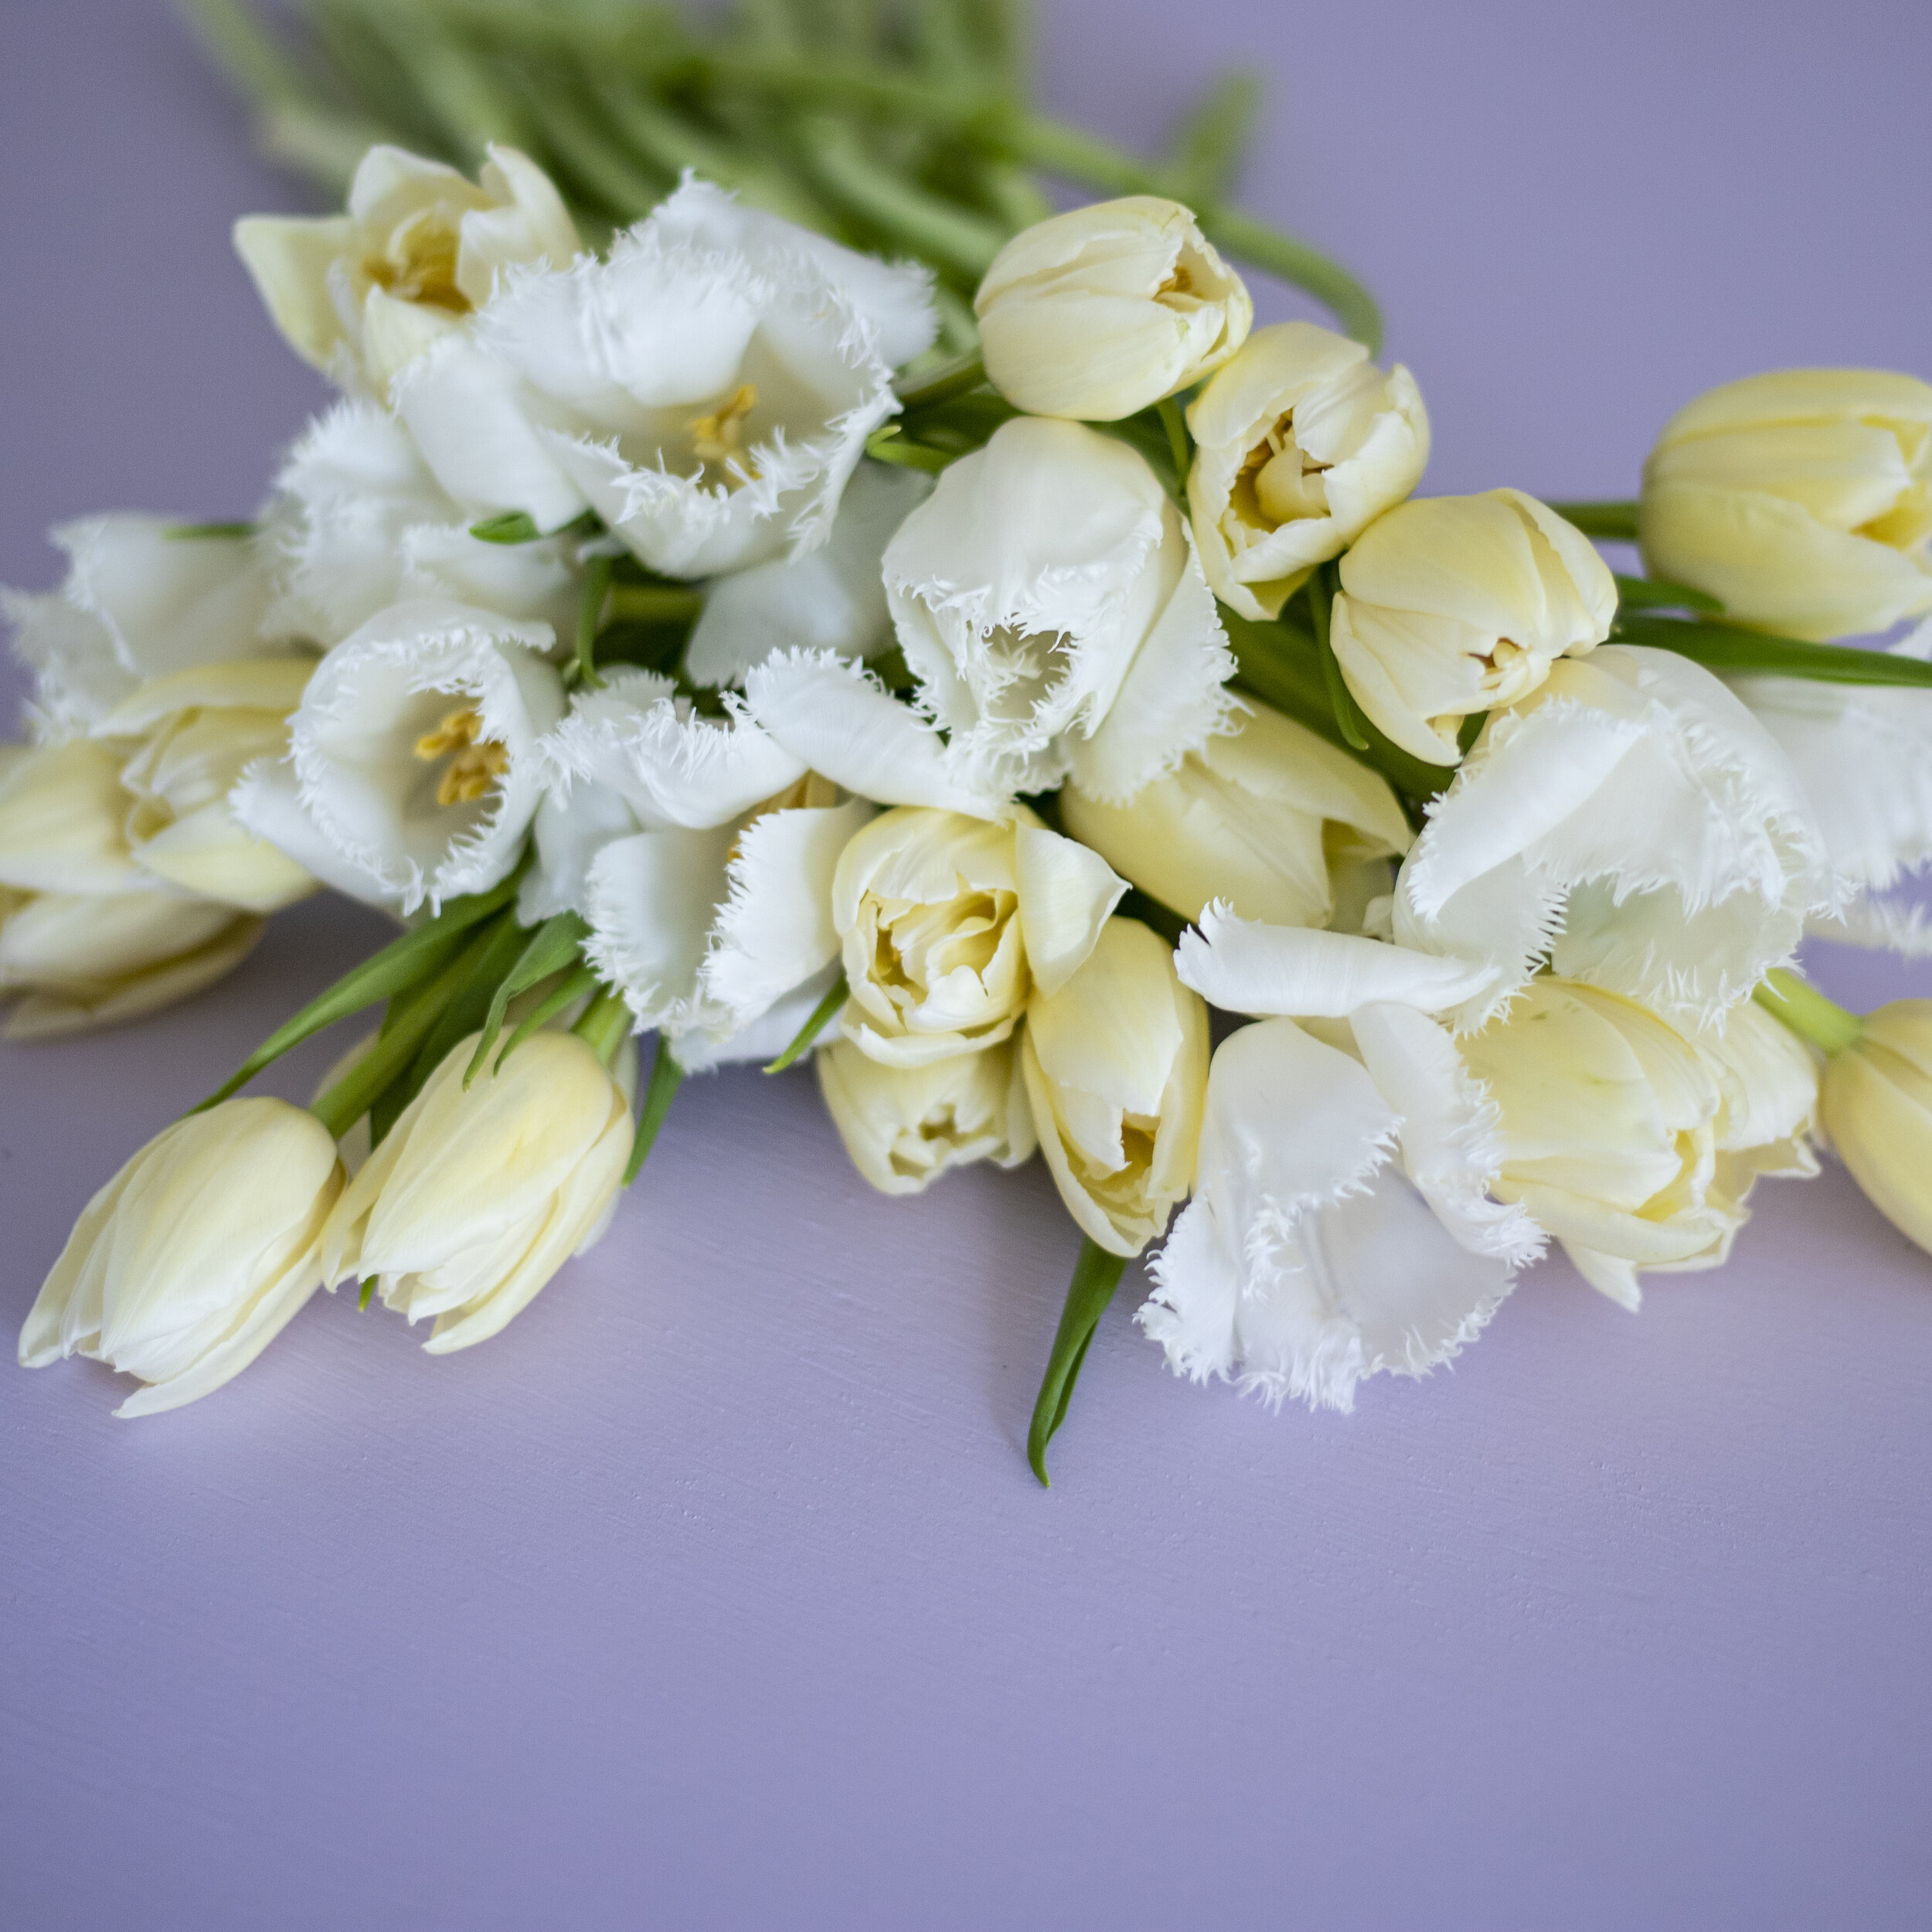 A close up of white and yellow tulips laying on a purple background